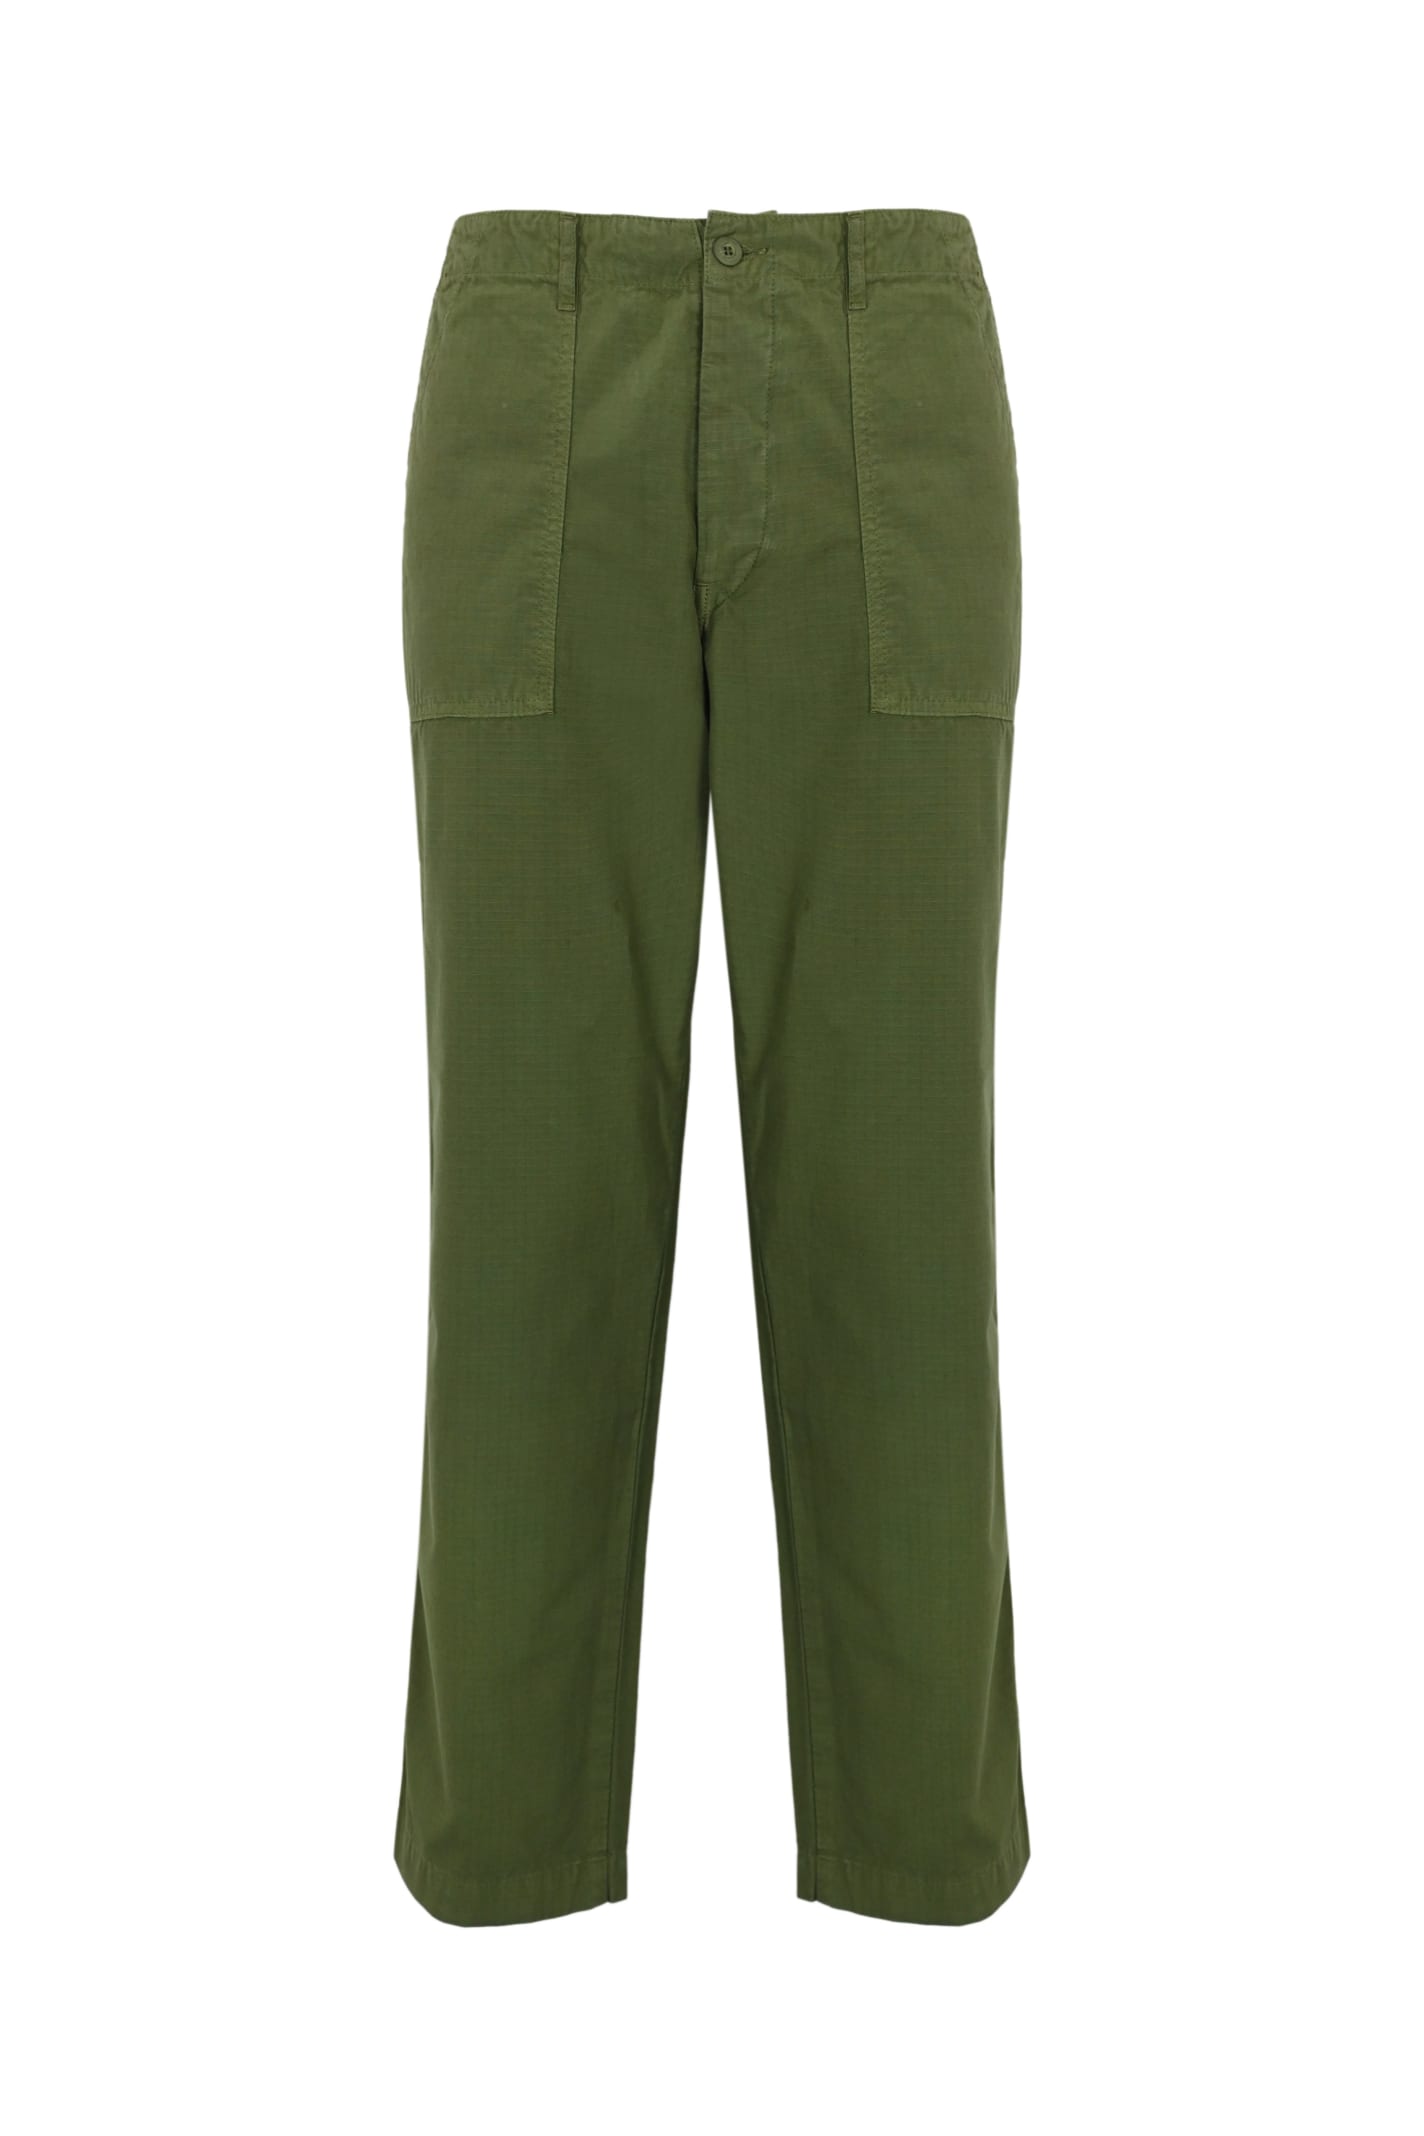 Roy Rogers Trousers With Big Pockets And Patches